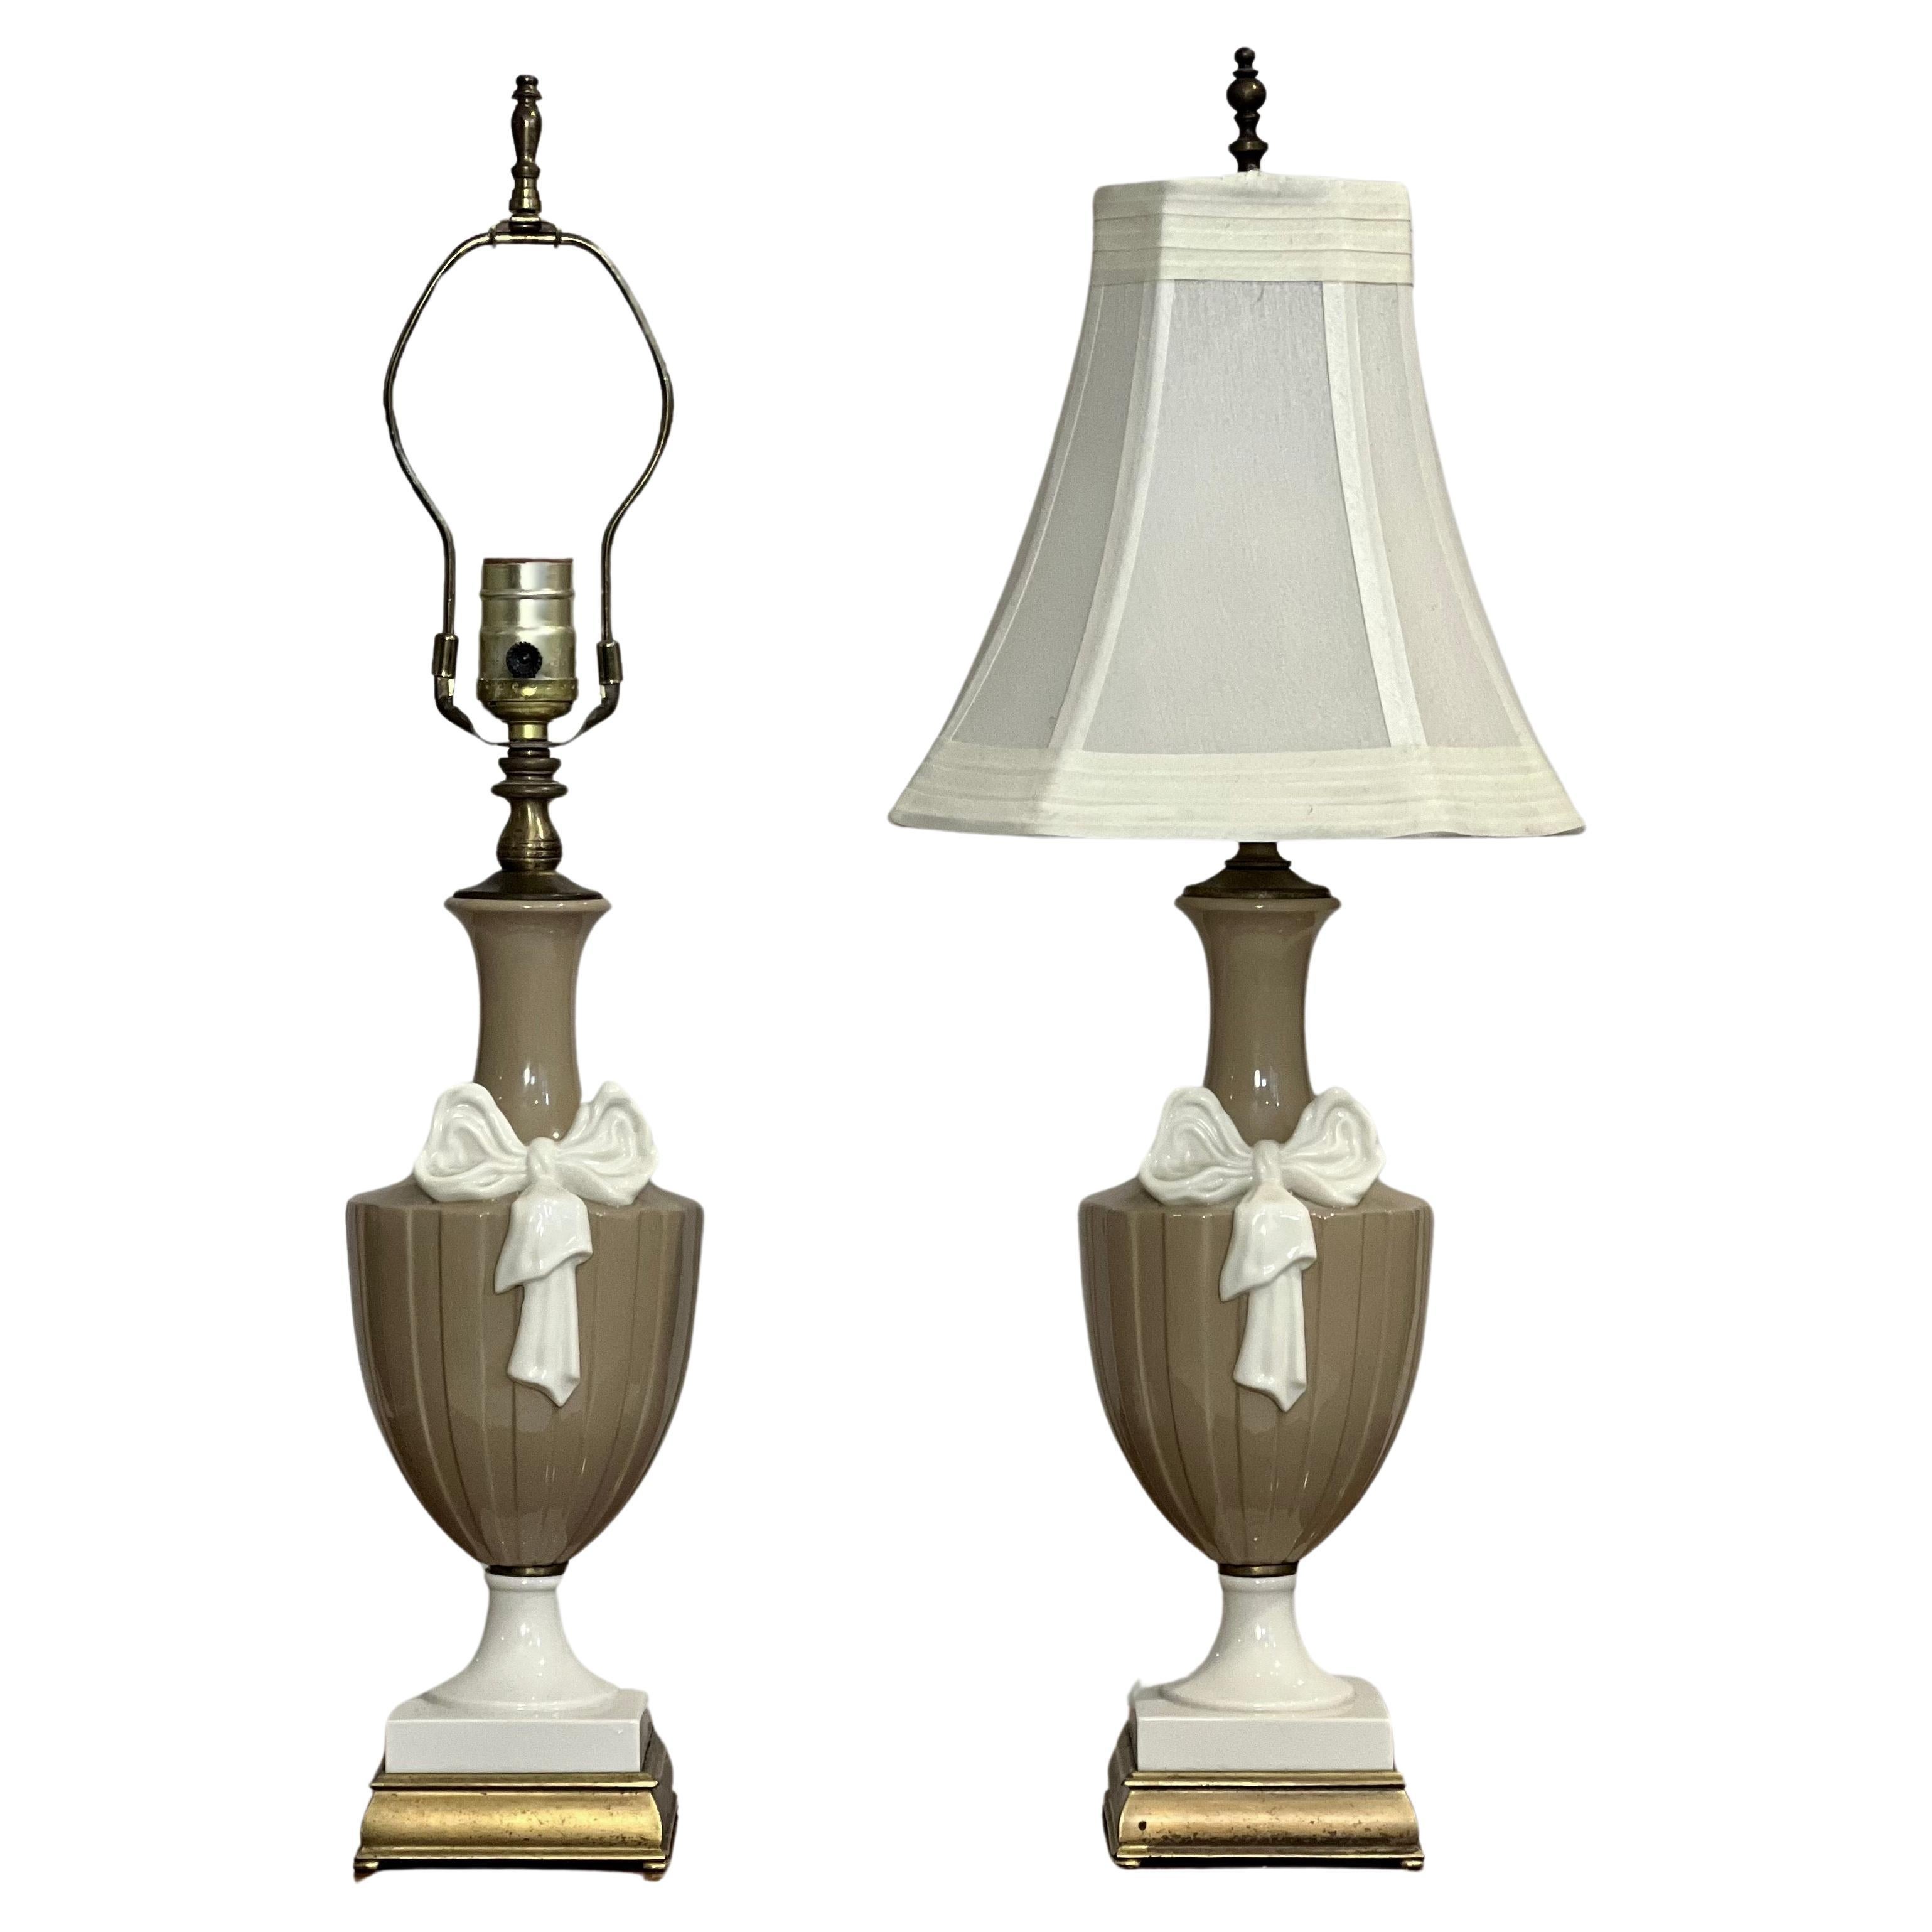 20th Century Lenox Porcelain Lamps in Taupe and White by Dav Art, NY, Pair For Sale